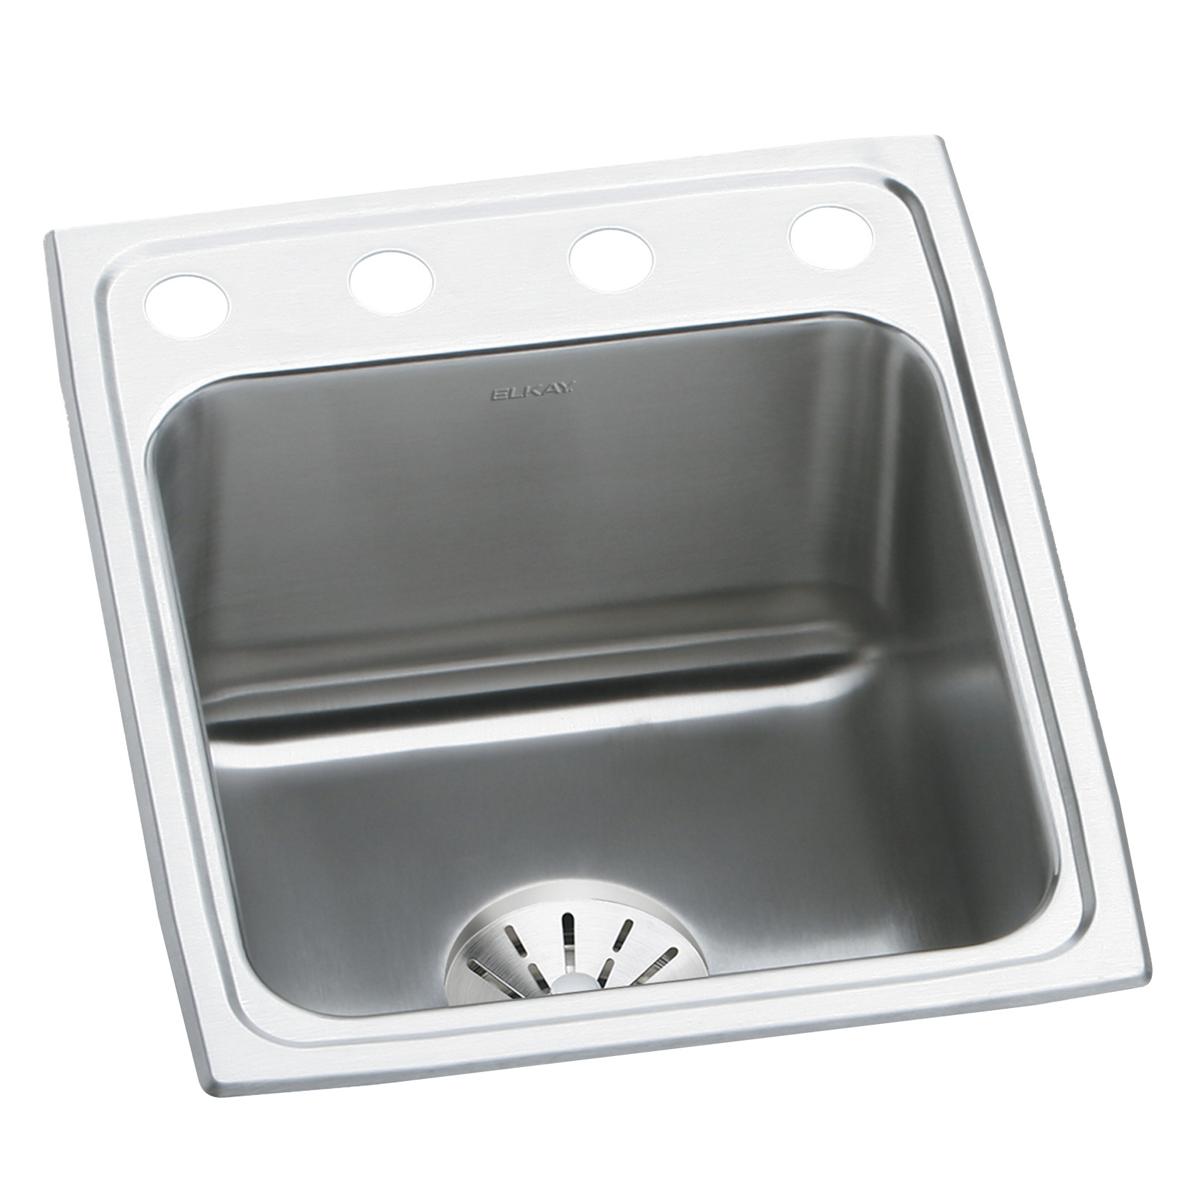 Elkay Lustertone Classic 17" x 22" x 10-1/8" OS4-Hole Single Bowl Drop-in Sink with Perfect Drain